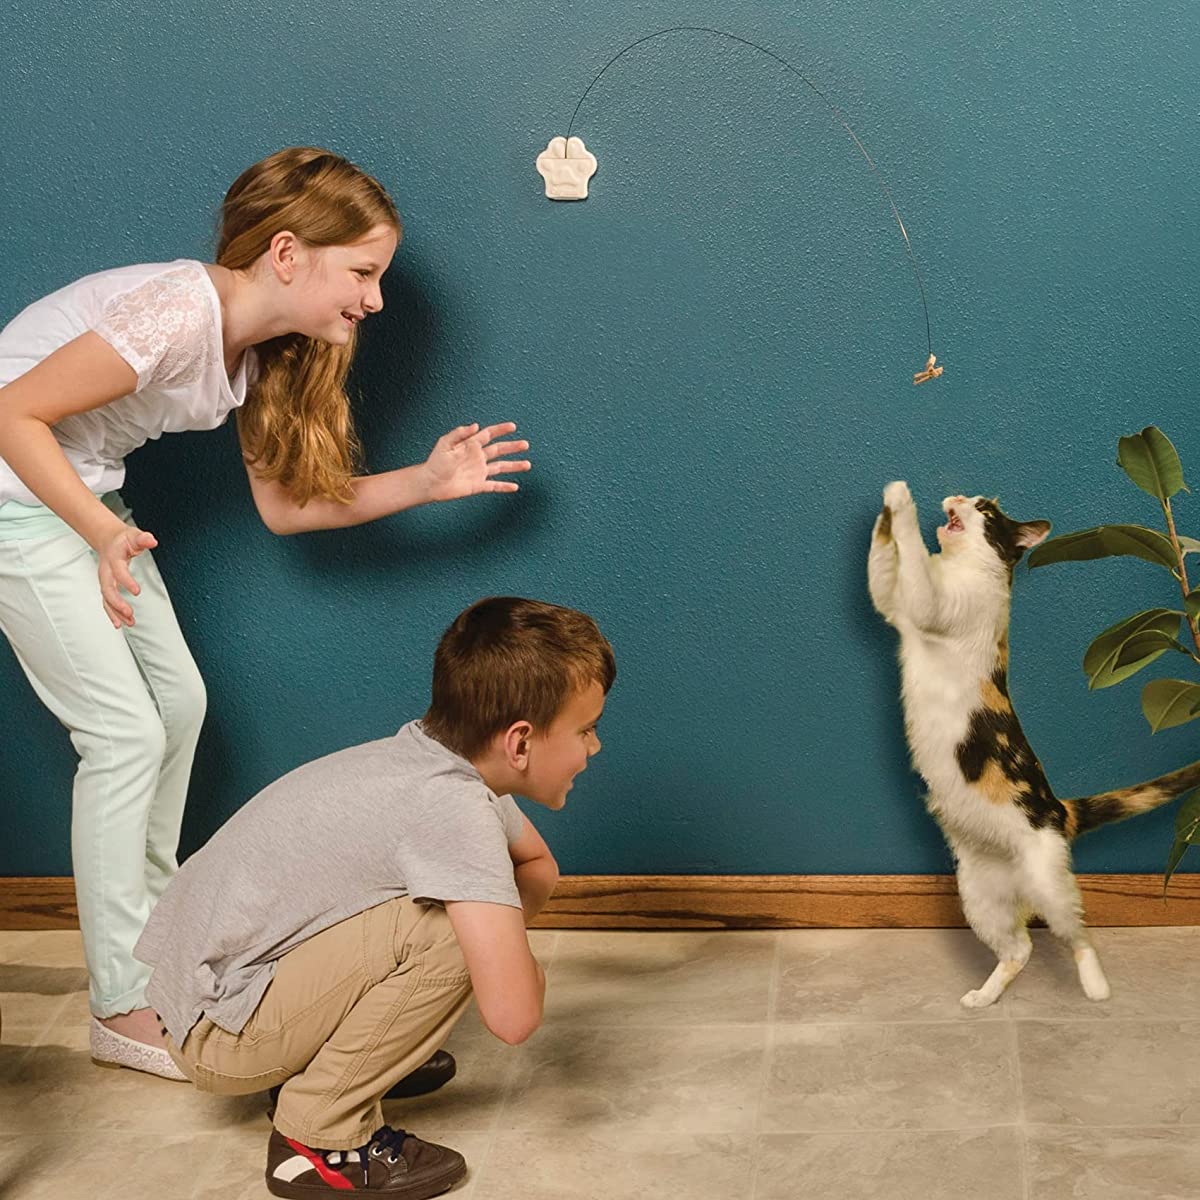 kids watching a cat play with a toy